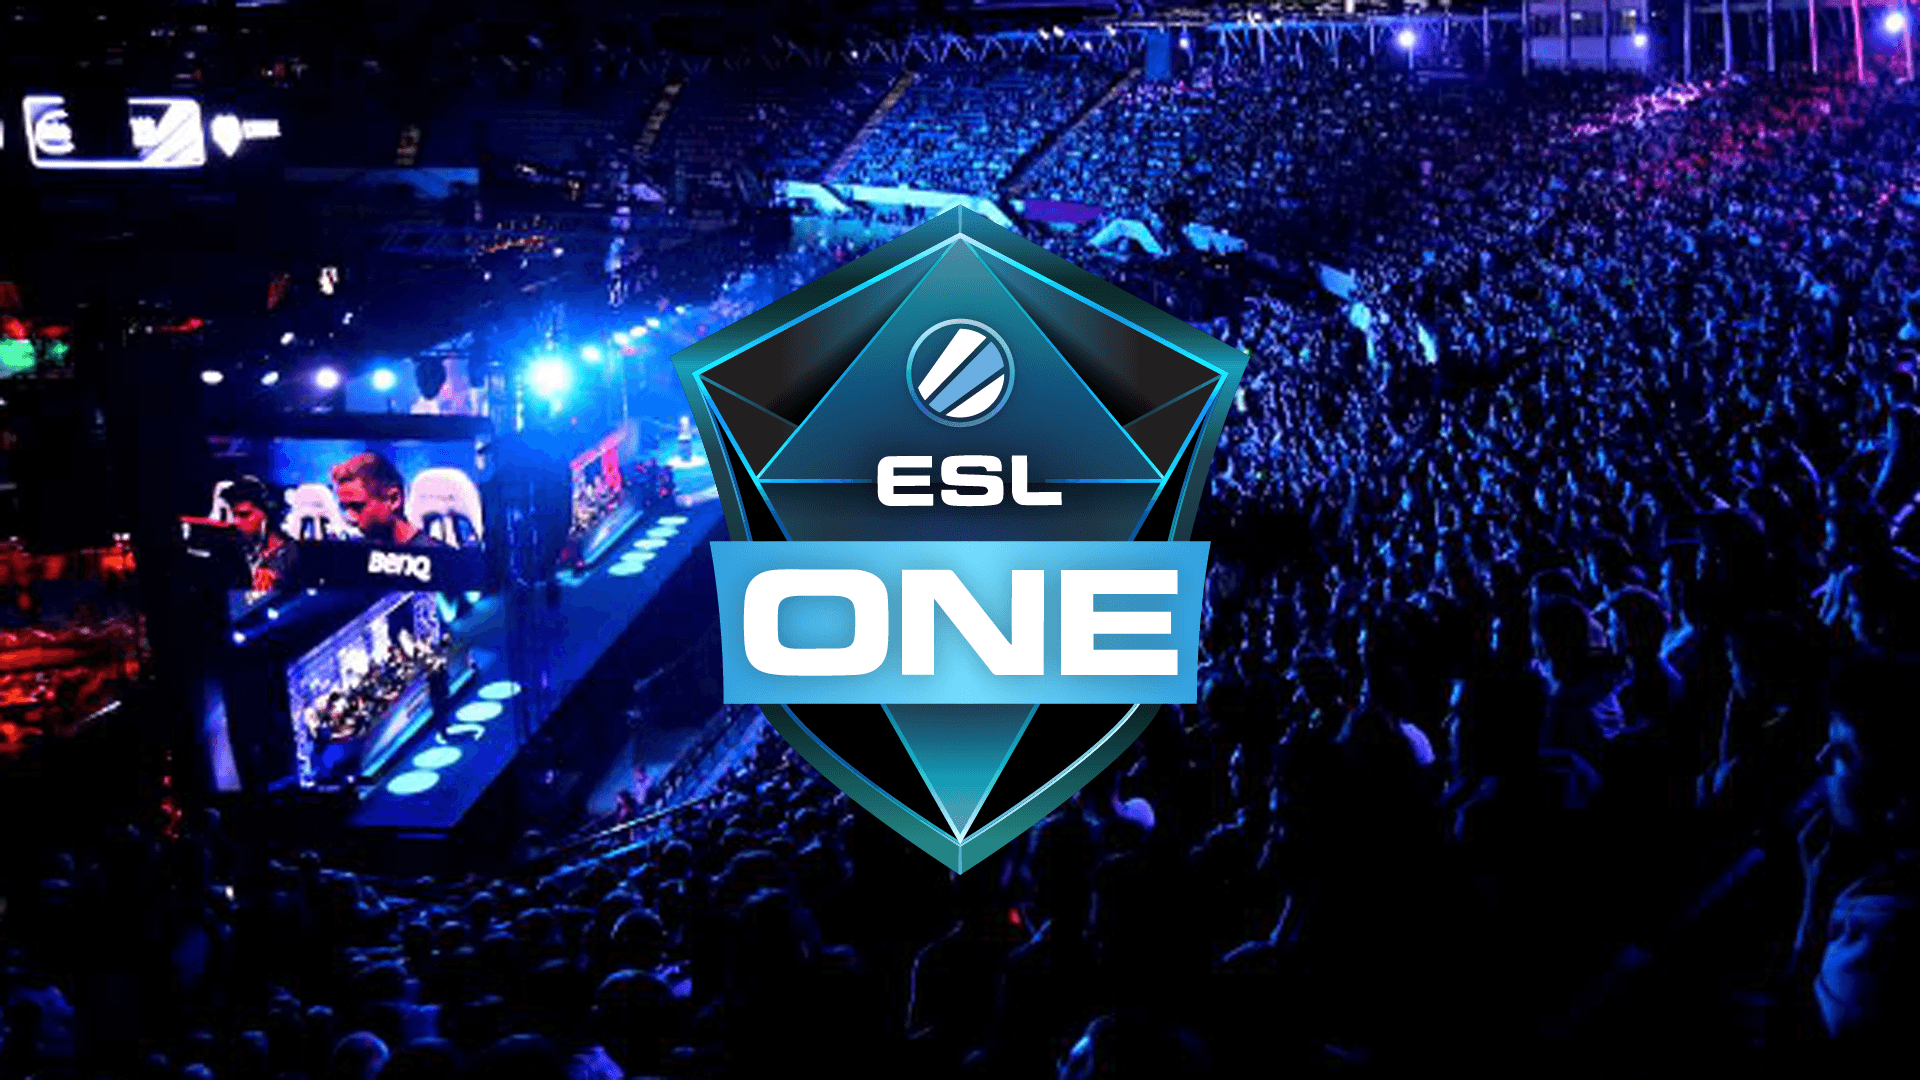 ESL COLOGNE 2016 HYPE. CS:GO Wallpaper and Background